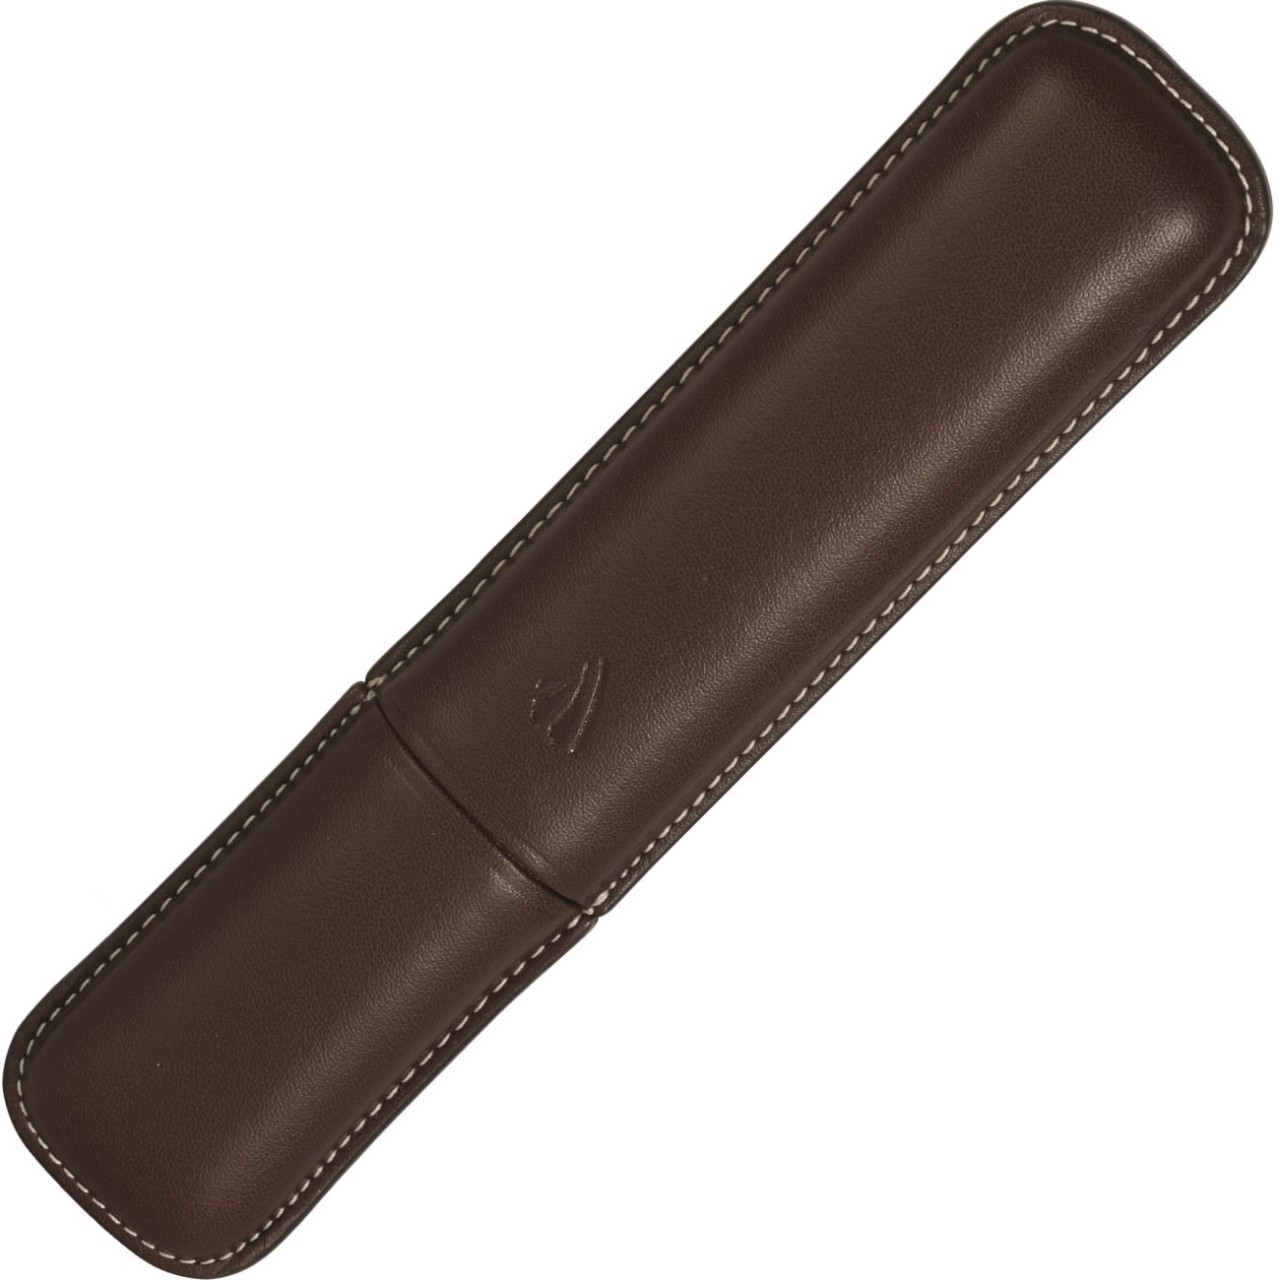 HARD CASE FOR 1 PEN * RIVIERA CHOCOLATE